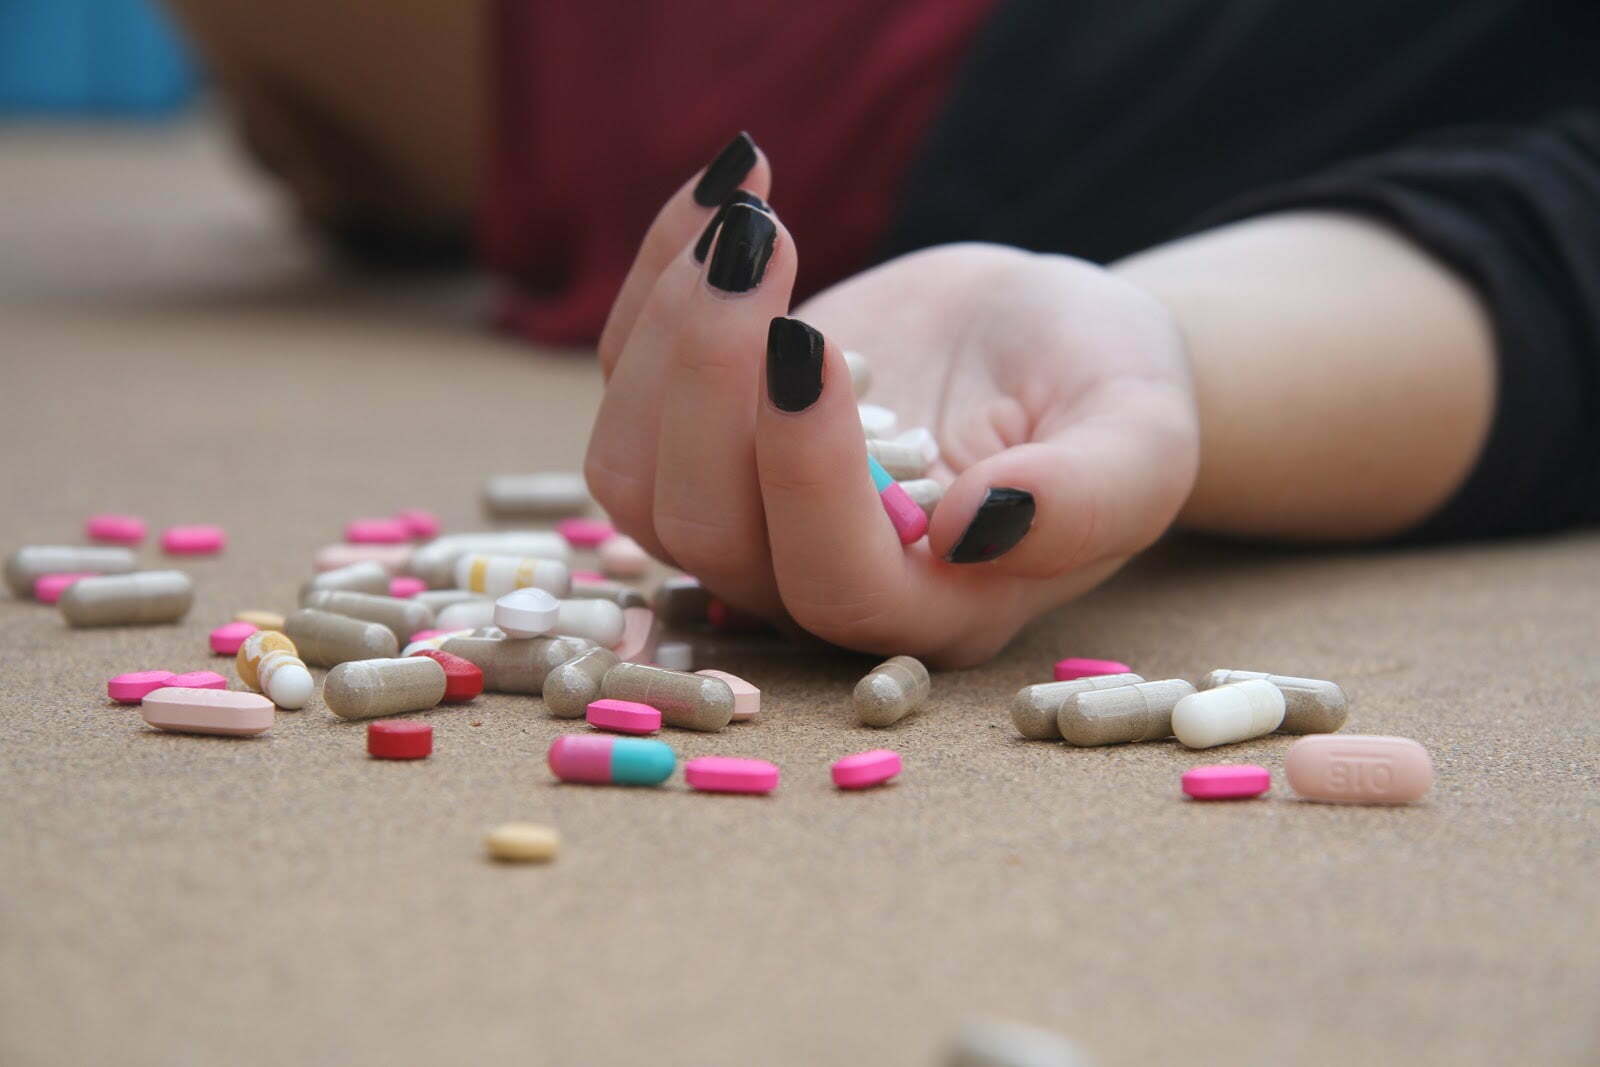 How to Identify a Serious Prescription Painkiller Addiction